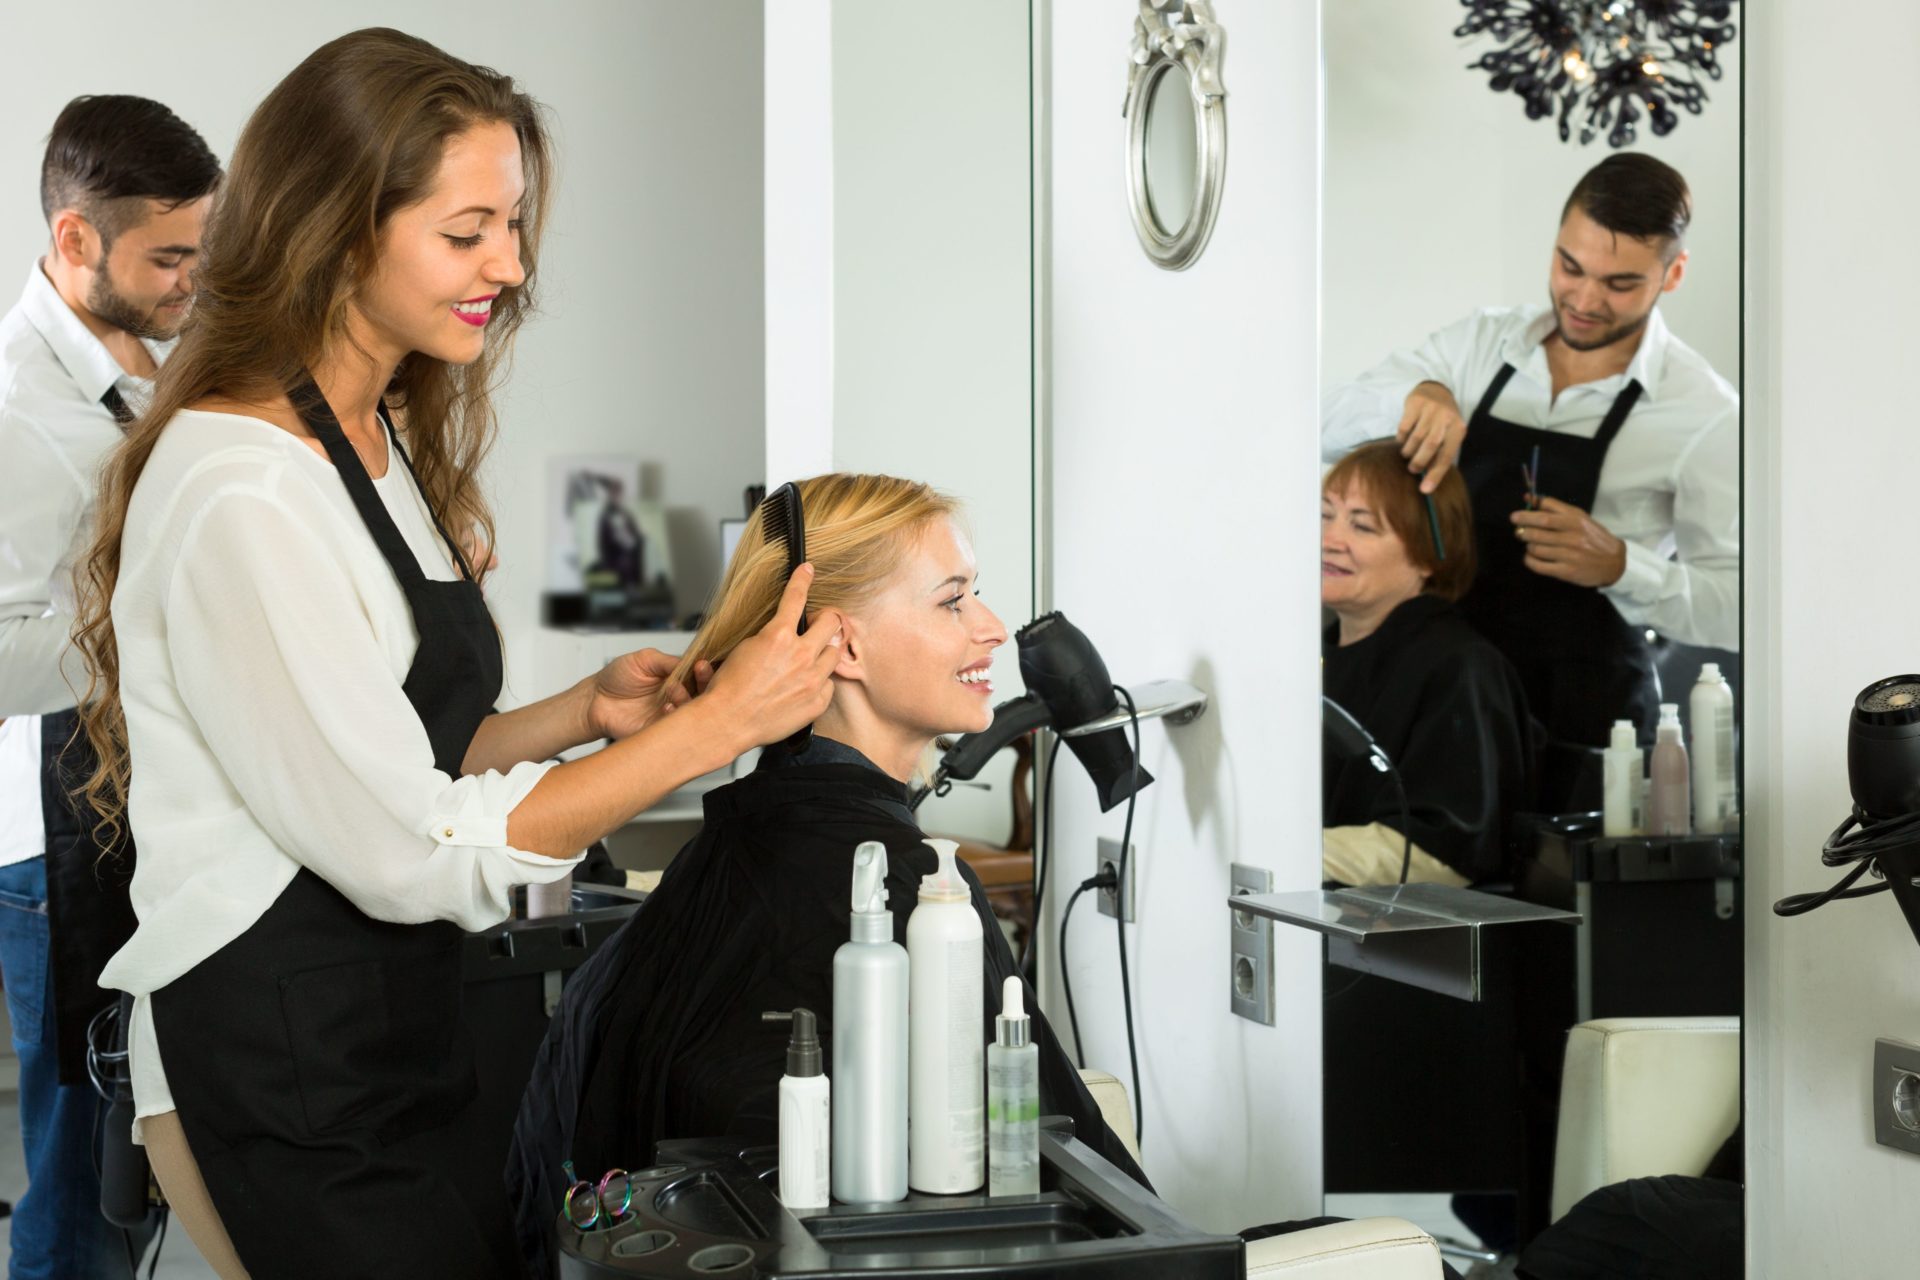 How To Be a Successful Salon Owner: 15 Useful Tips